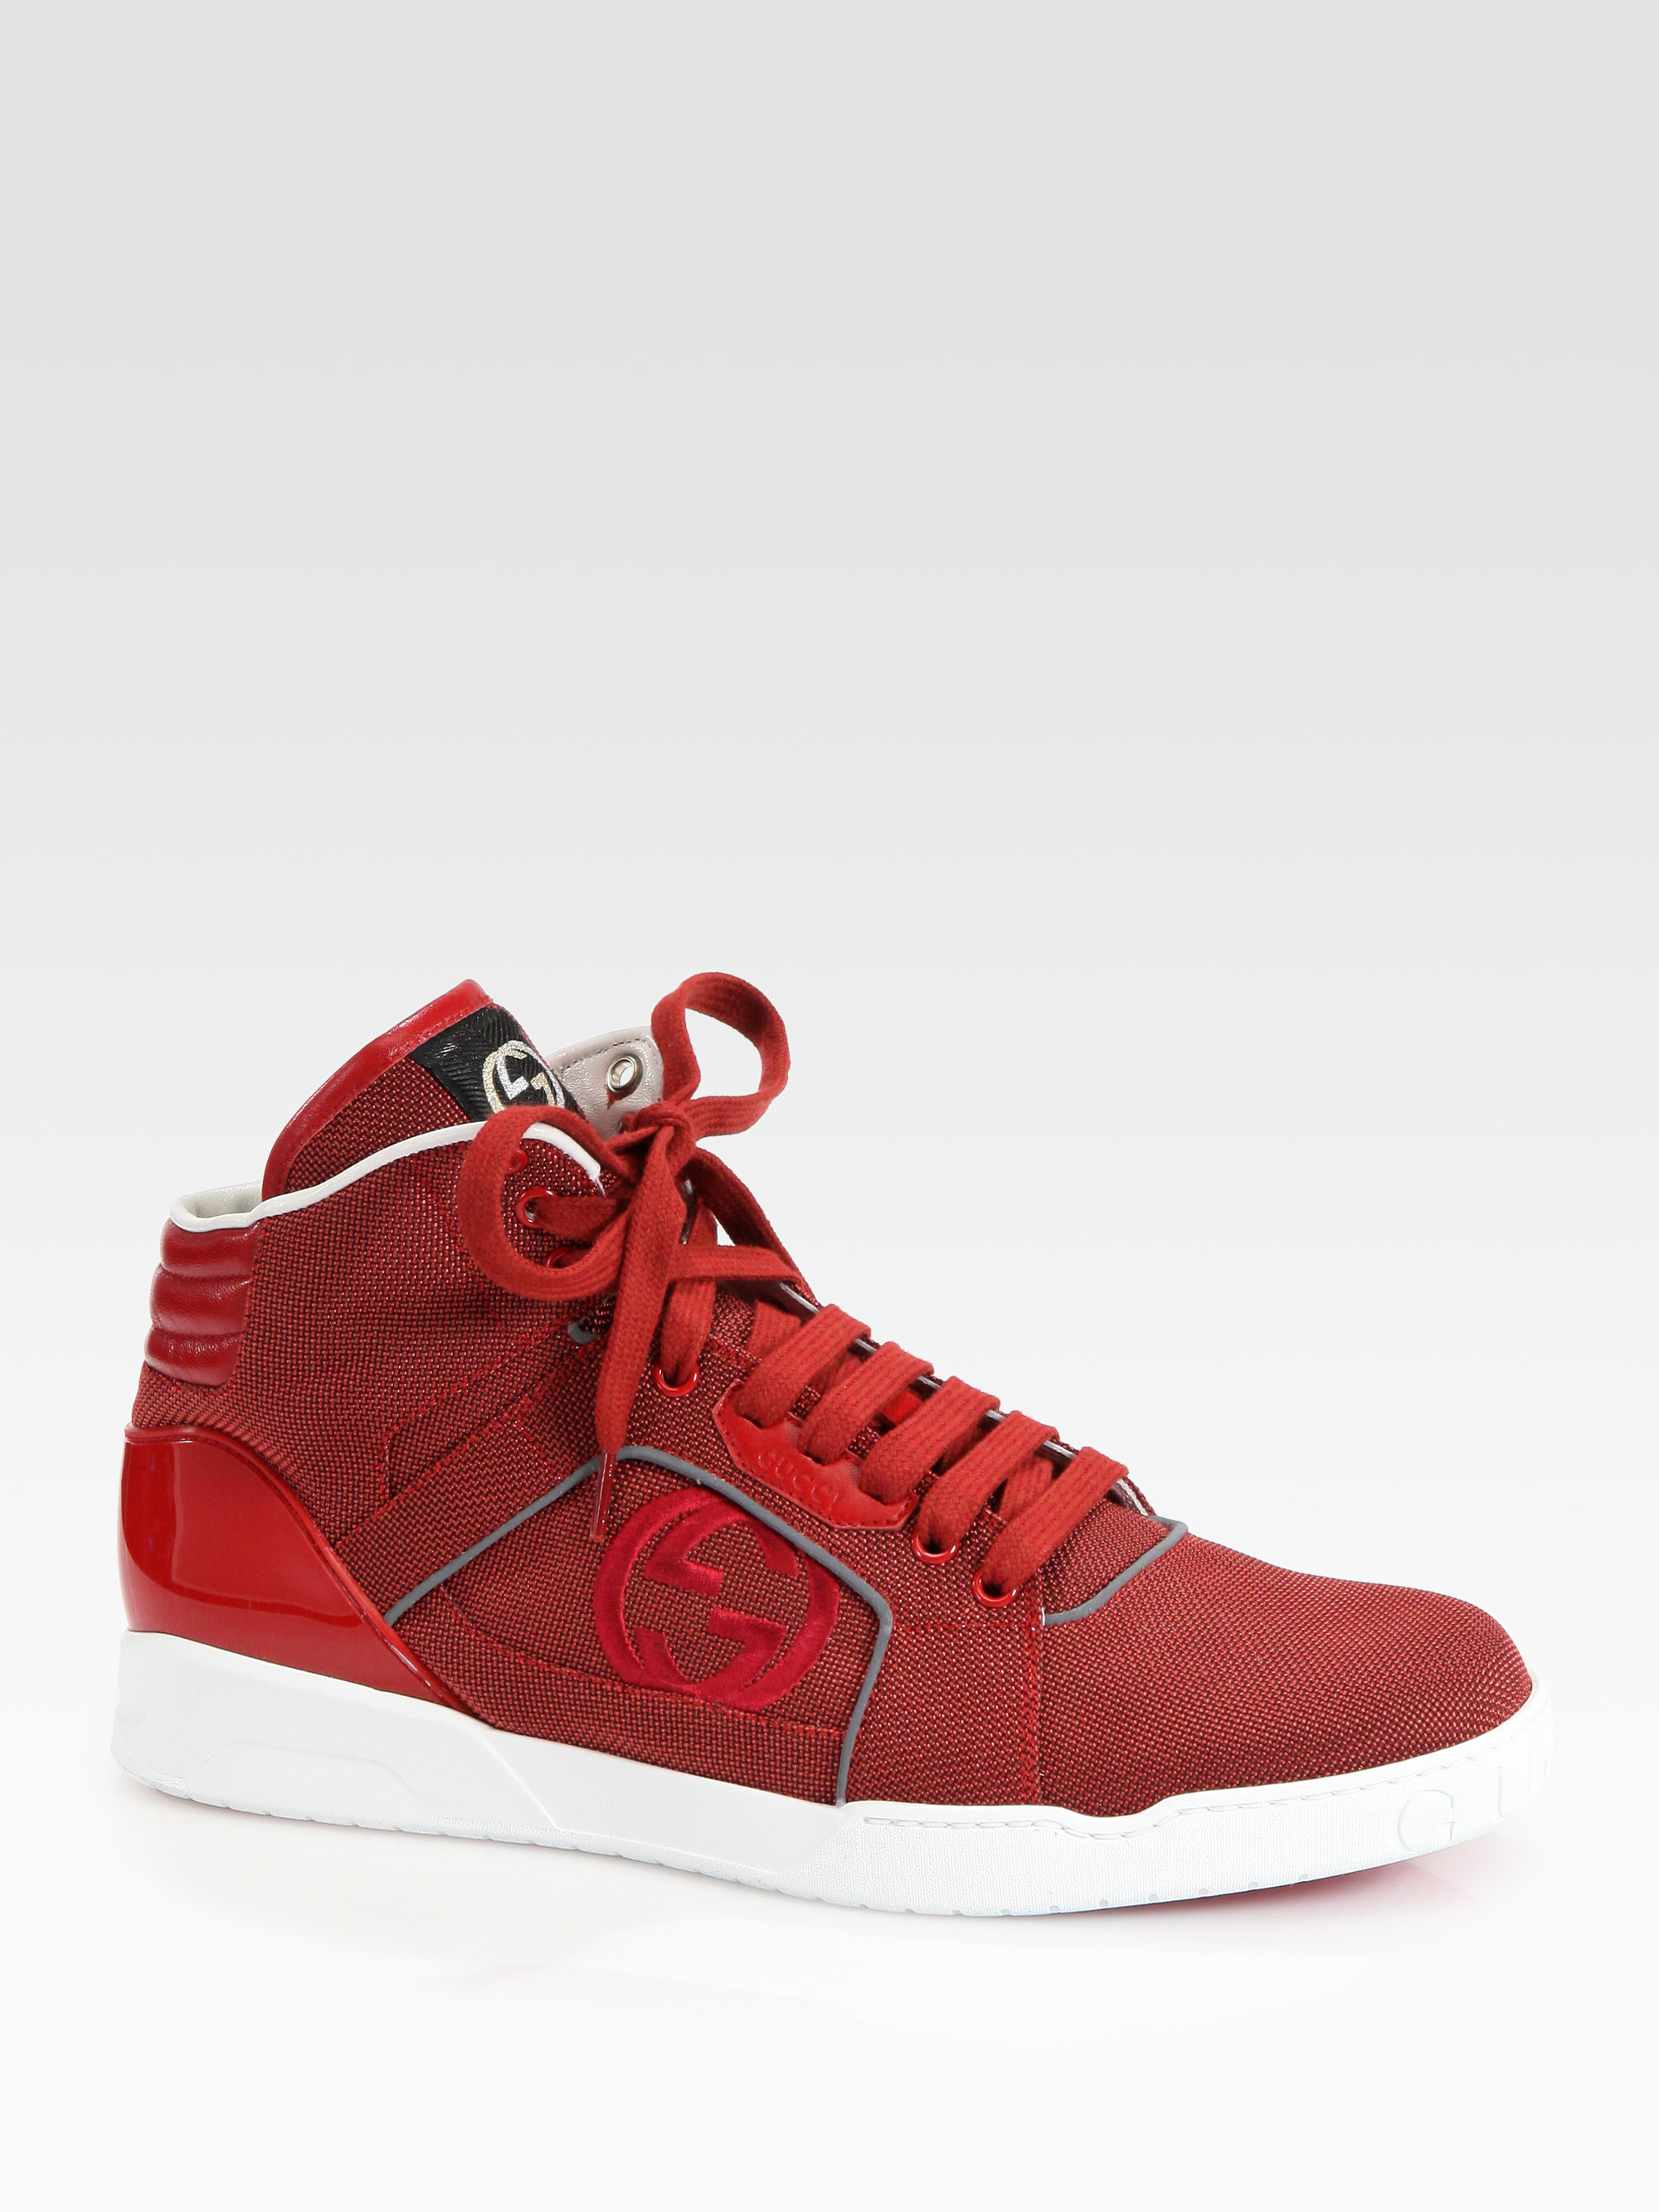 Gucci Rebound Mid Hightop Sneakers in Red (ruby) Lyst